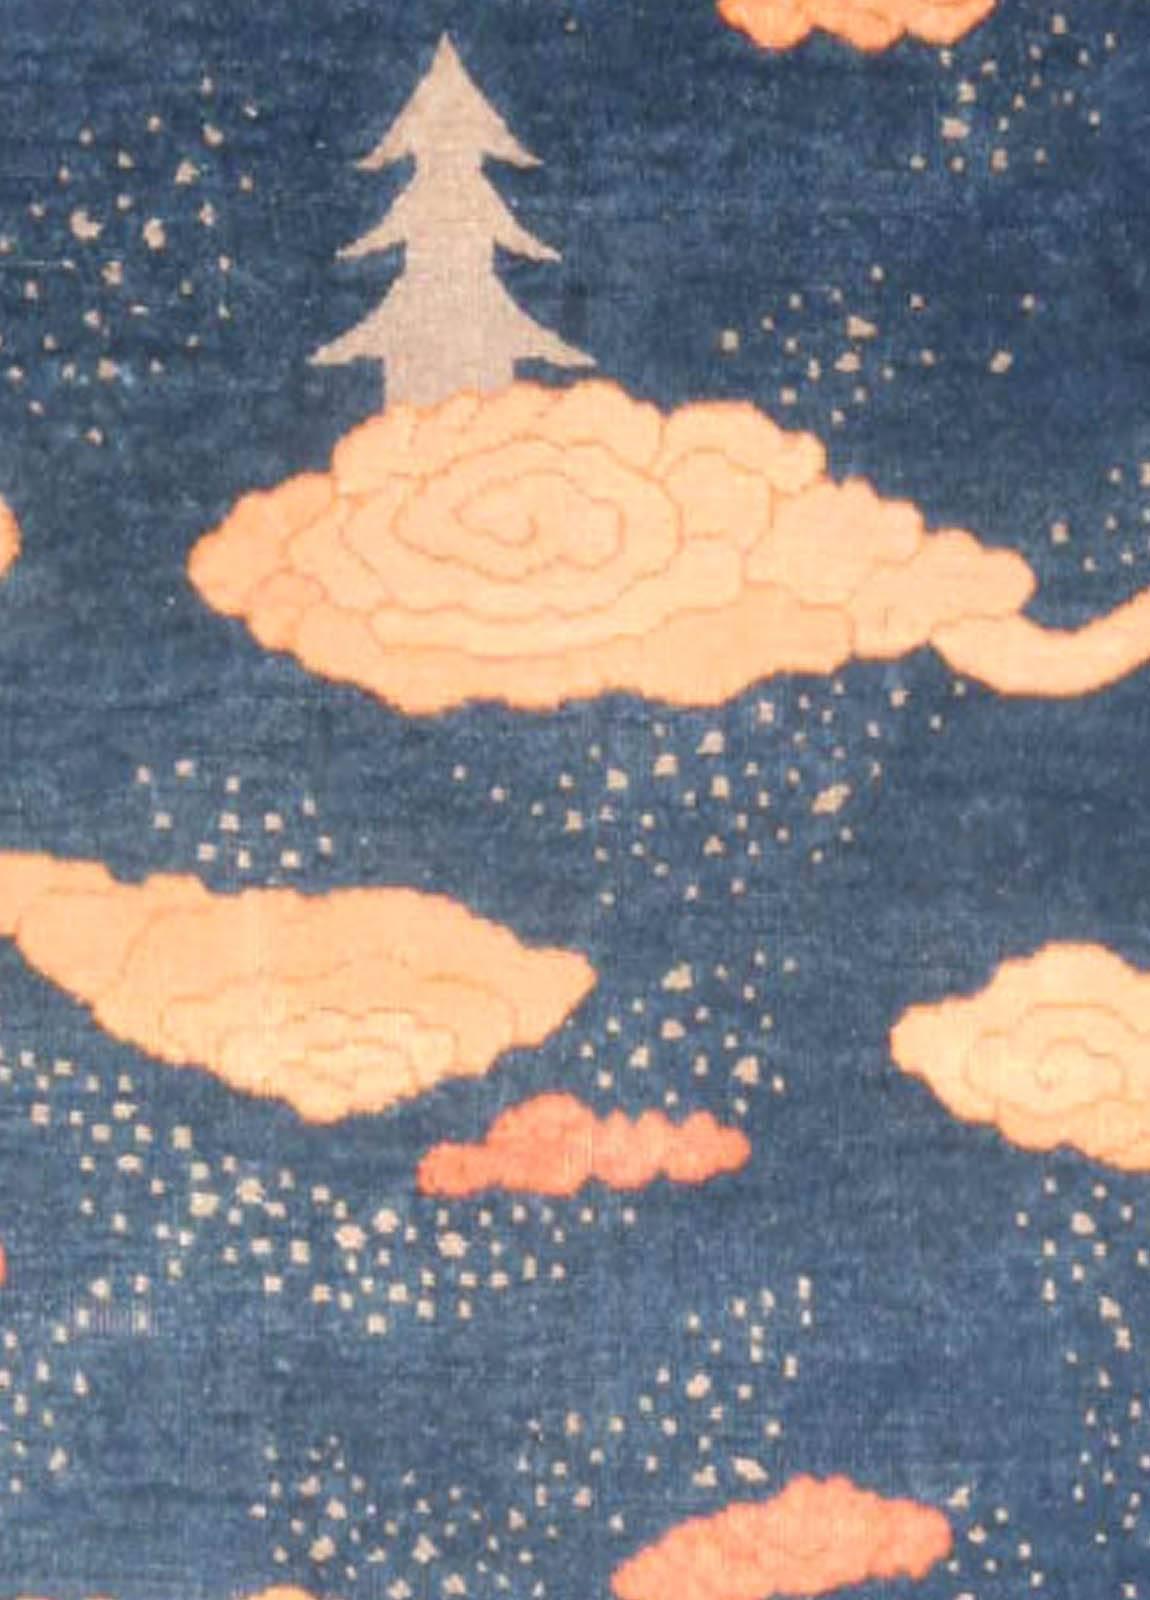 A playful example from the DLB collection of Chinese Art Deco rugs, which has a blue field dominated by scattered stylized cloud formations and trees in shades of ivory and orange.